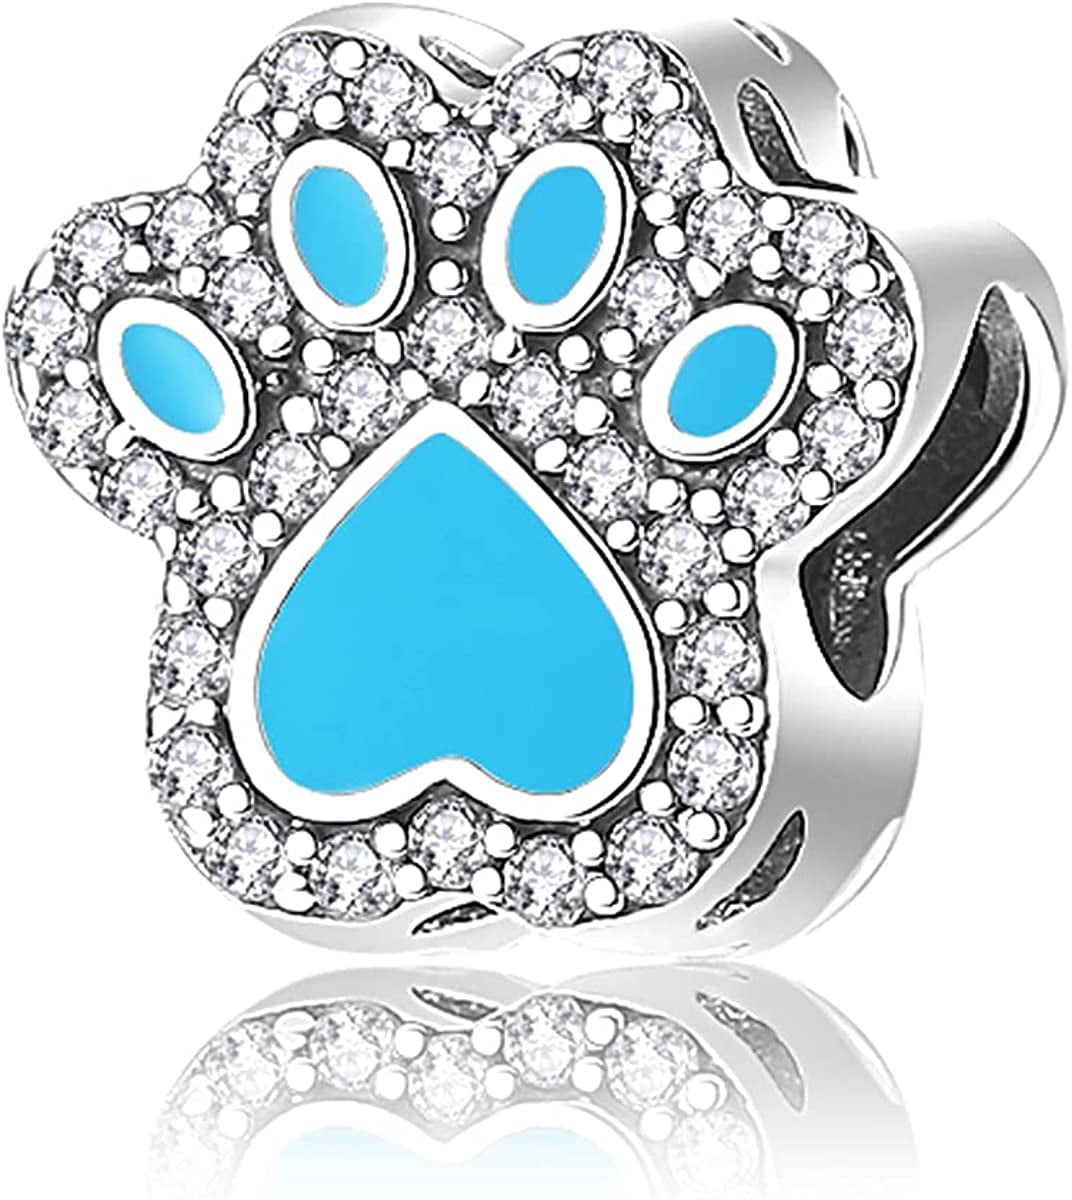 Dog Paw Print 925 Sterling Silver Bead Fits European Brand Charms 